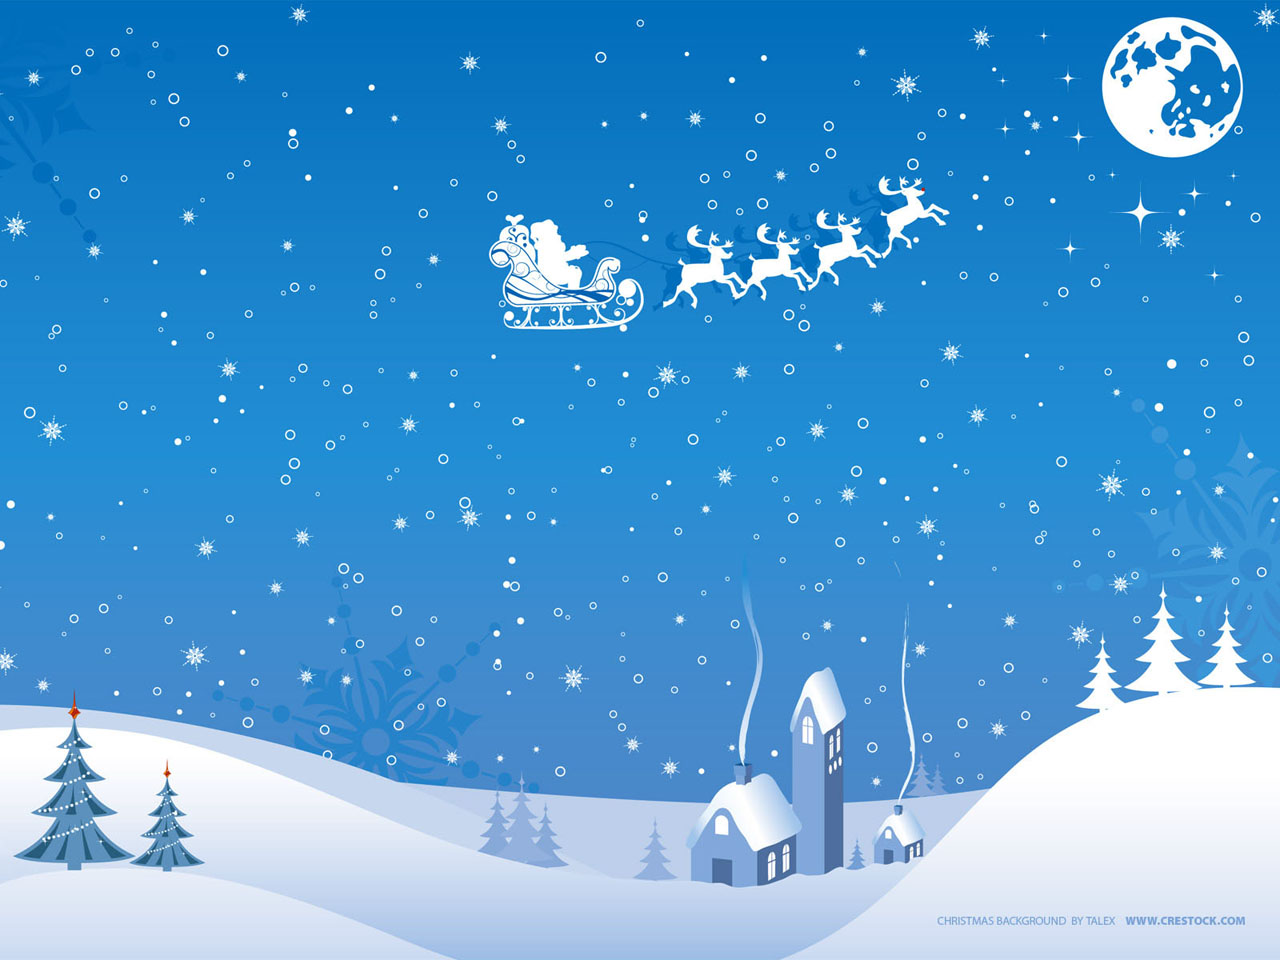 50 Beautiful Christmas and Winter themed Wallpapers for your desktop - Part  2